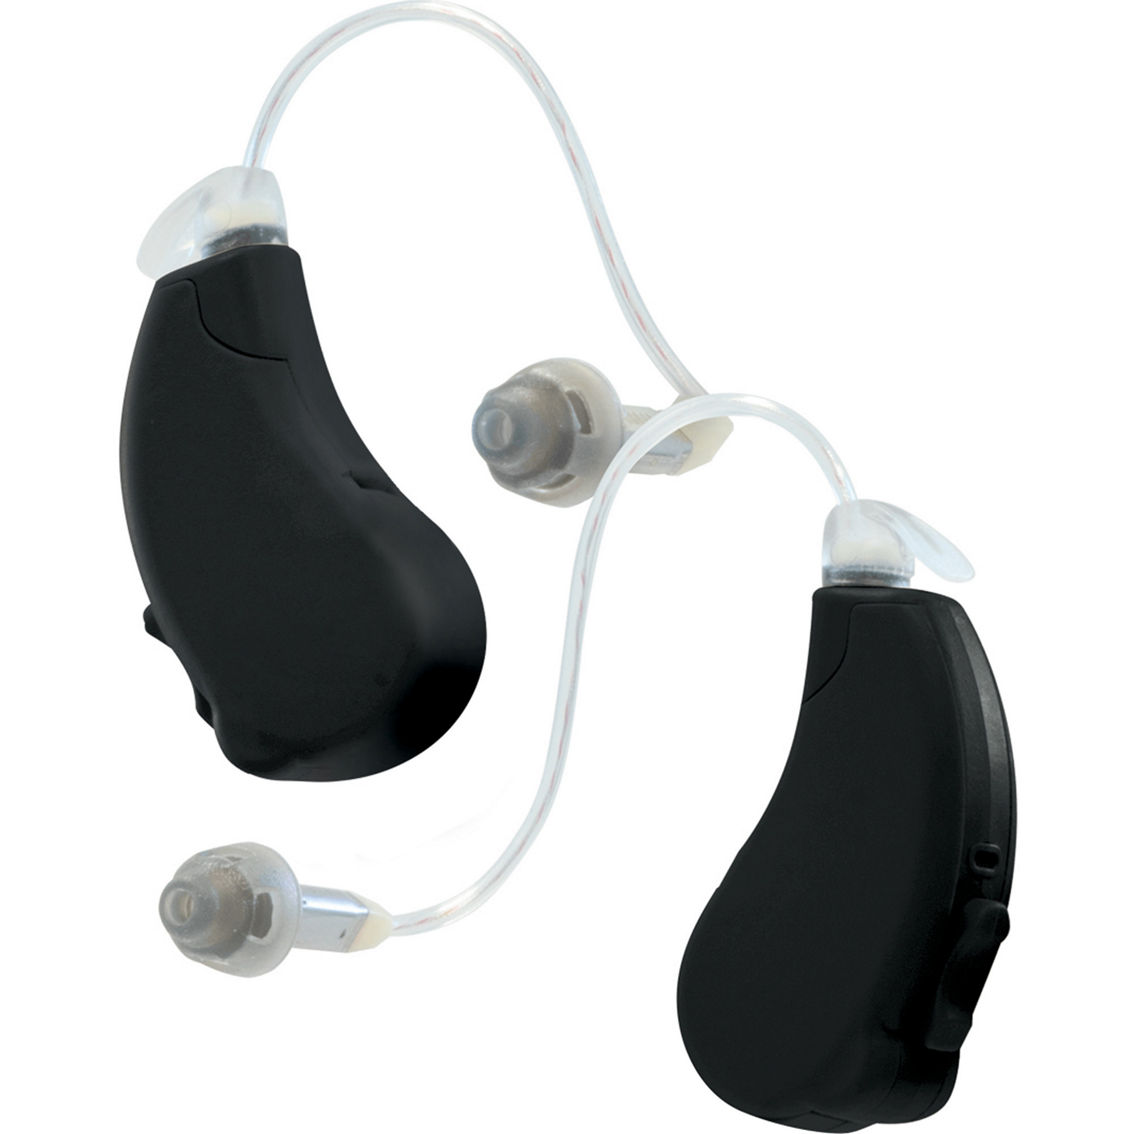 Lucid Hearing Engage Premium OTC Hearing Aid Android - Image 1 of 2